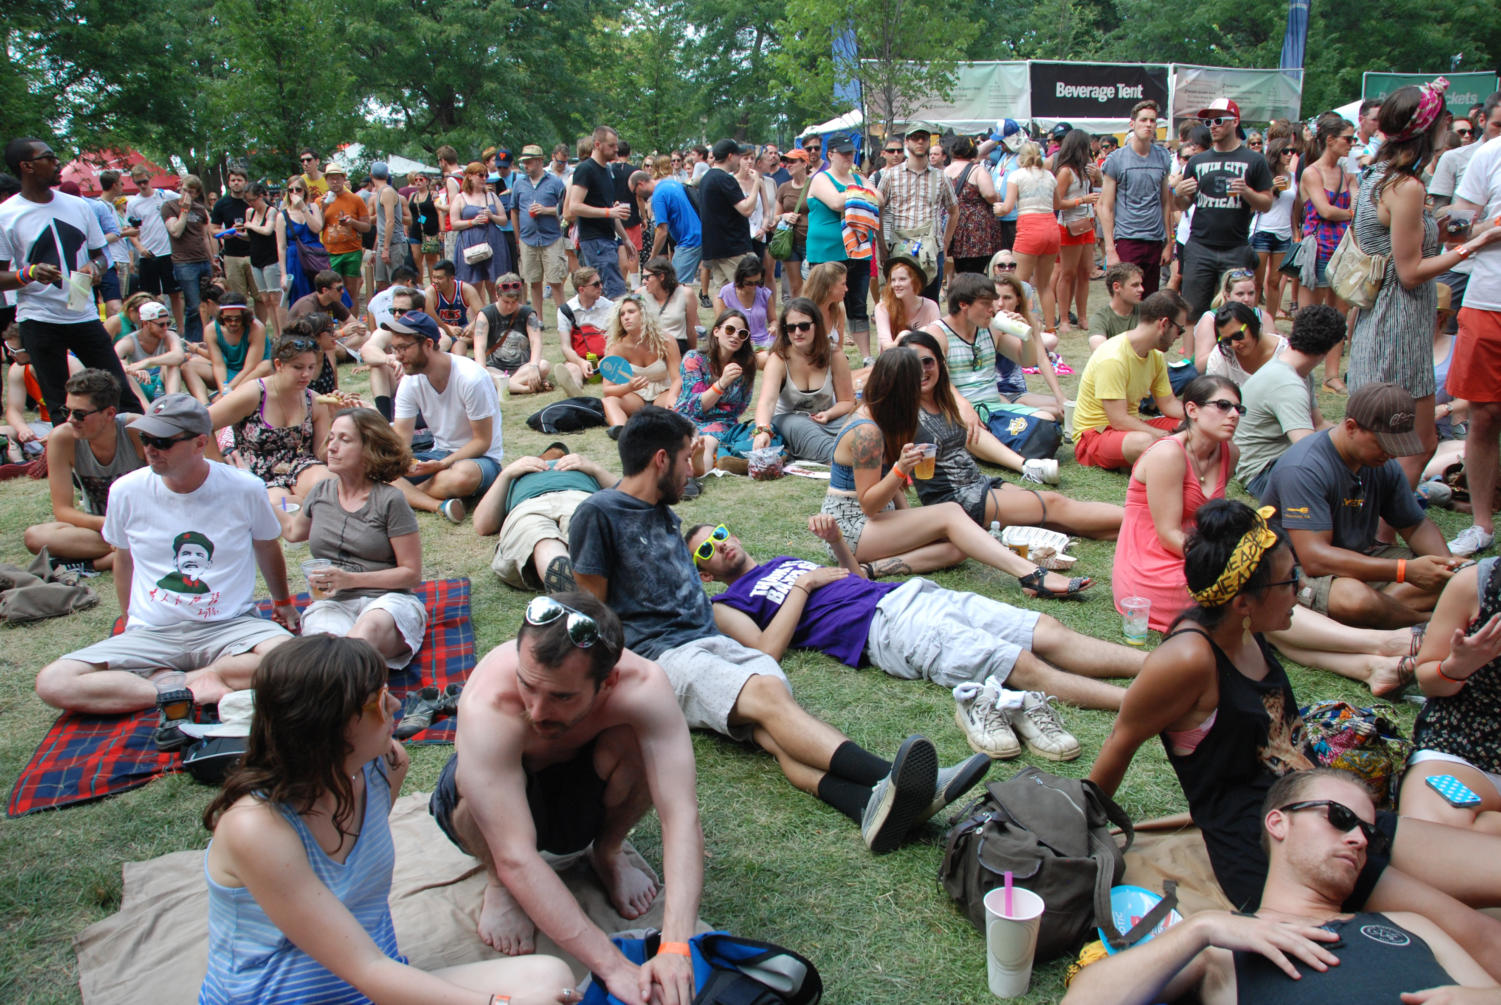 The Pitchfork Music Festival was an eclectic mix this year with lots of crowds despite the heat.